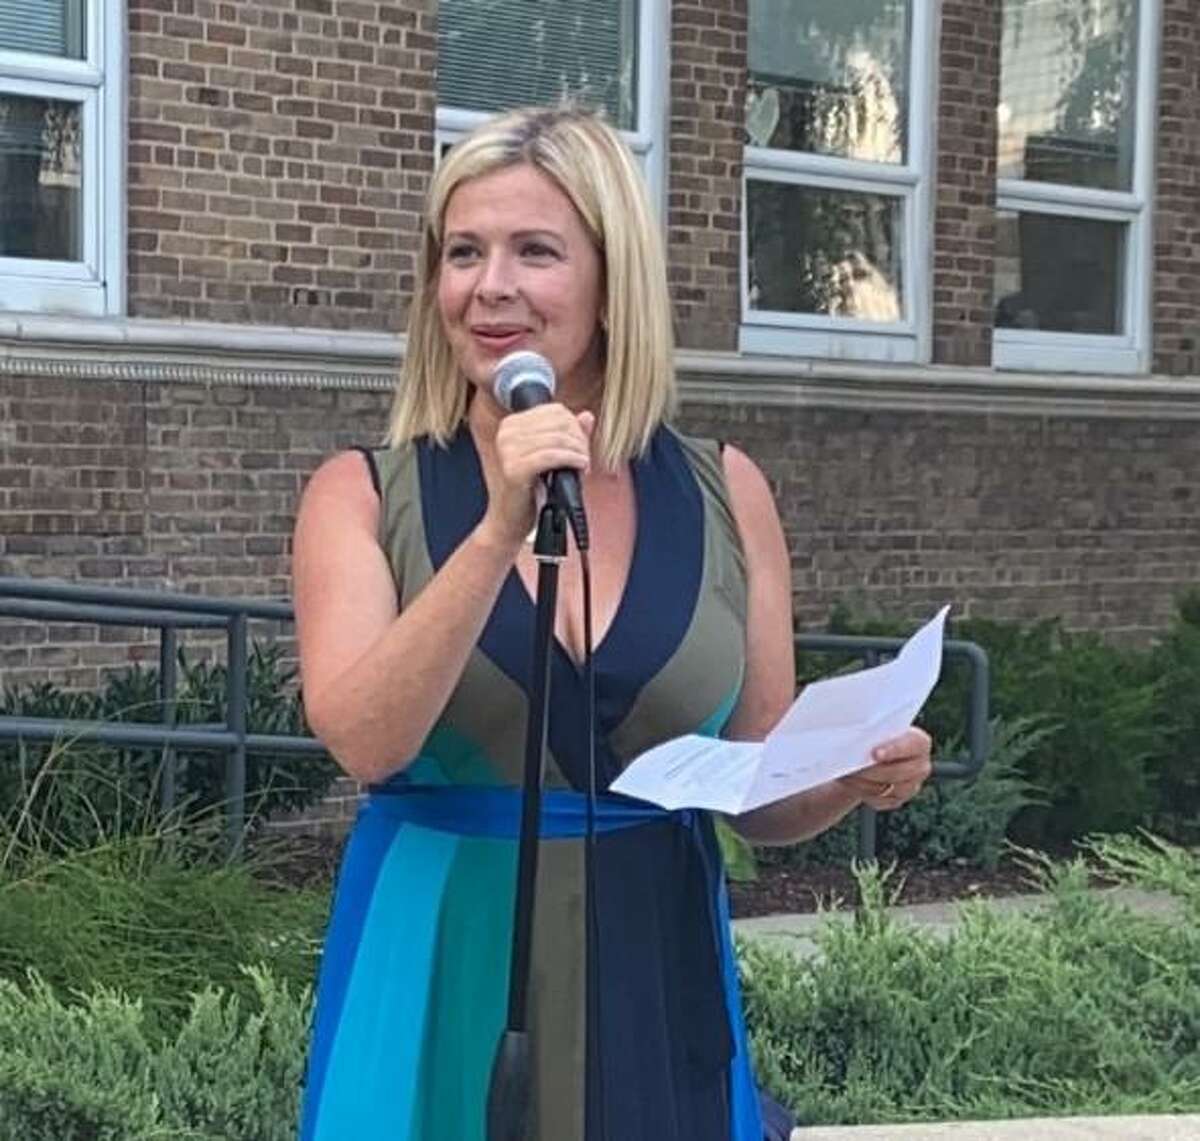 Tara Ochman, a Democrat, announced her candidacy for first selectman in front of Darien Town Hall Thursday, July 15, 2021.